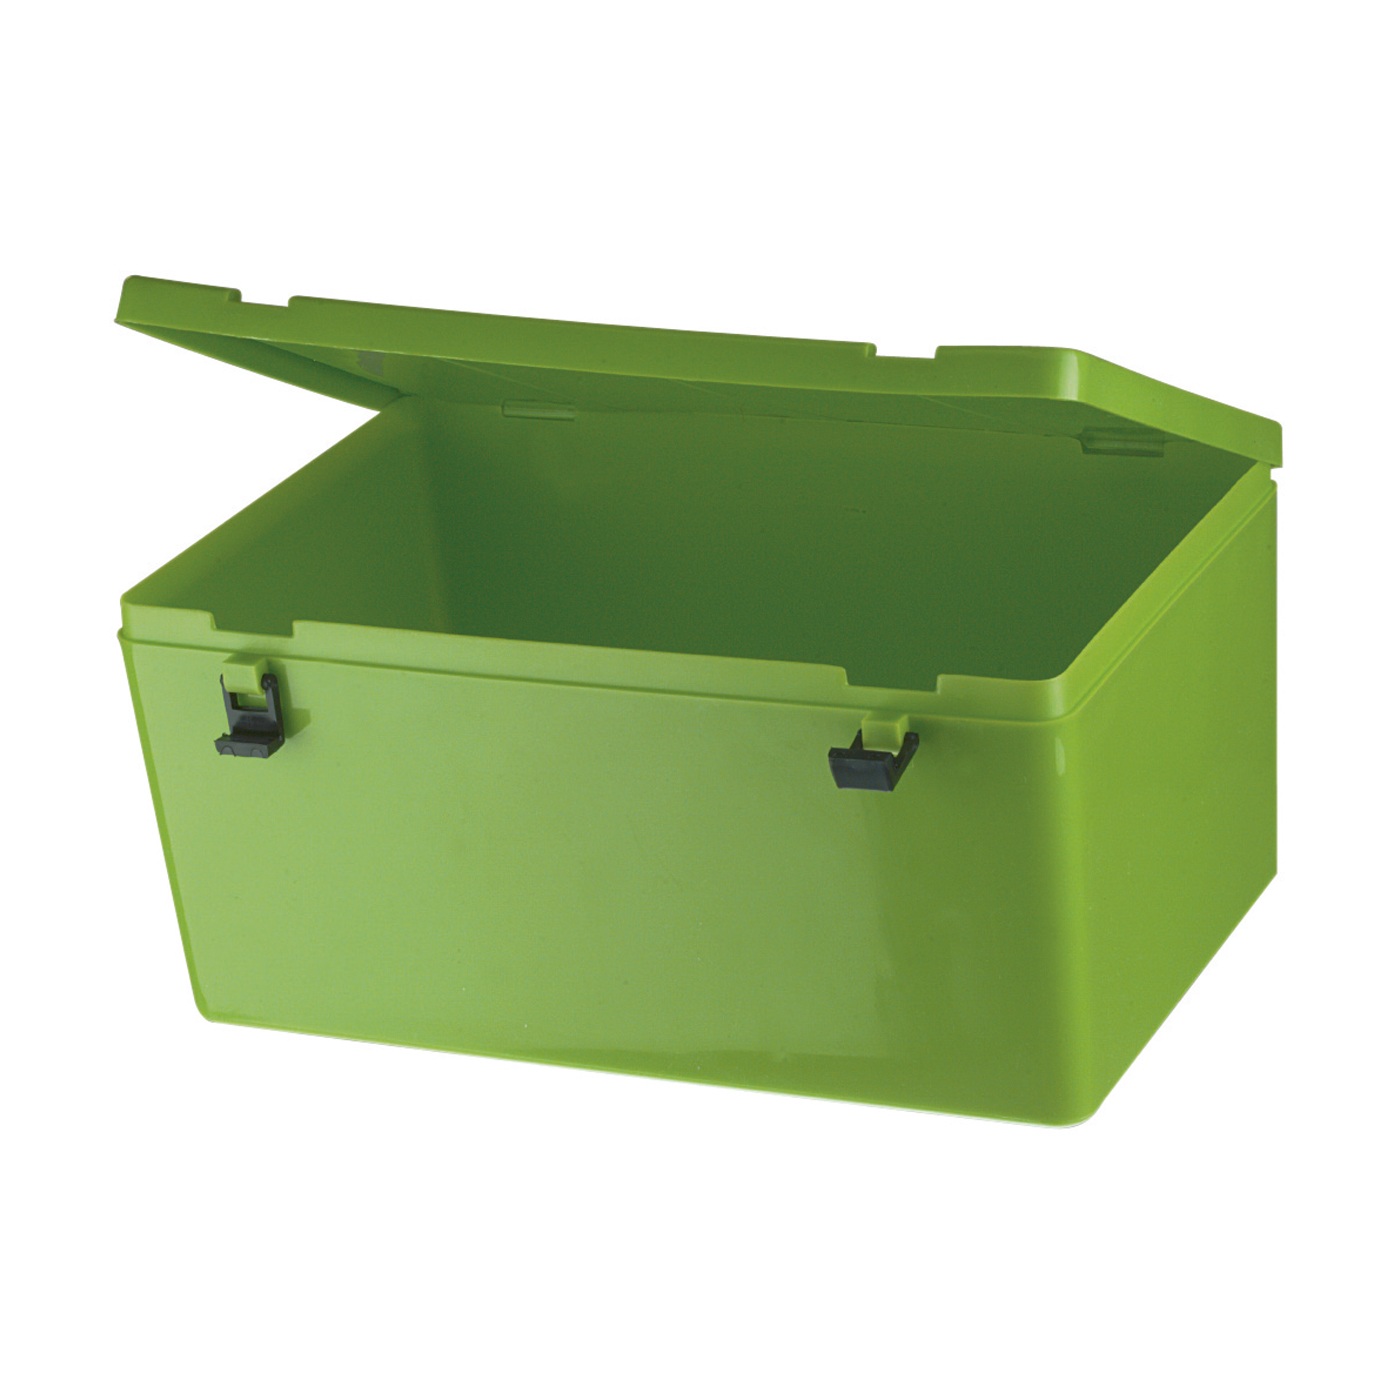 Dispatch Container, 4.5 l, Green - 1 piece